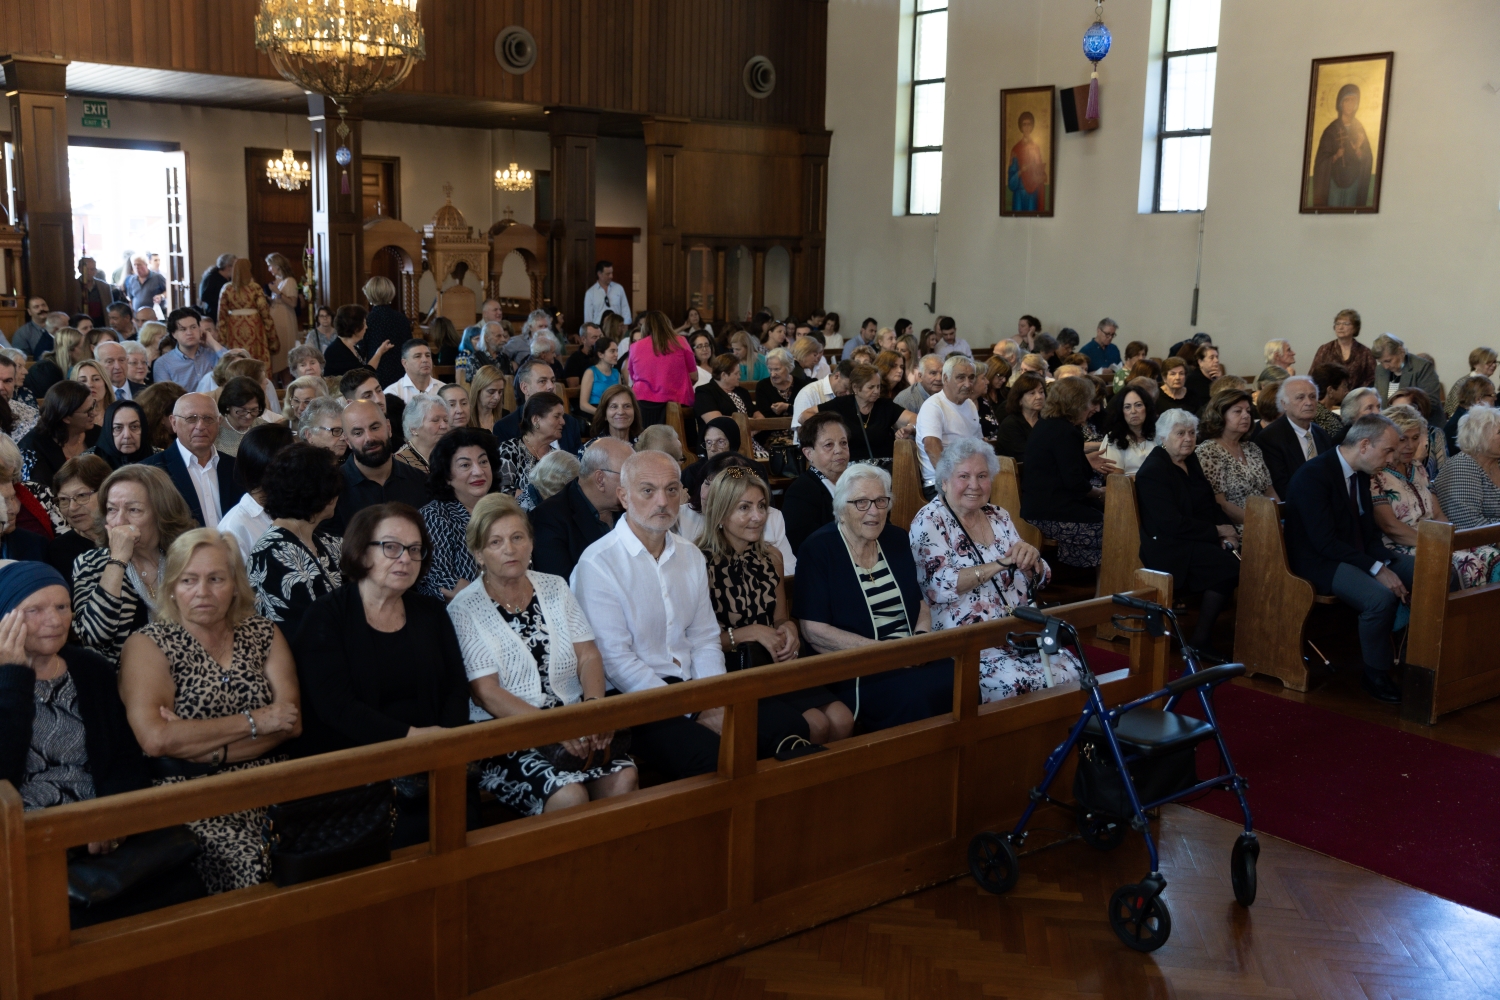 Sydney: Emotional presentation of the book “The Heart of Giving”, about the work of Fr. Nektarios Zorbalas